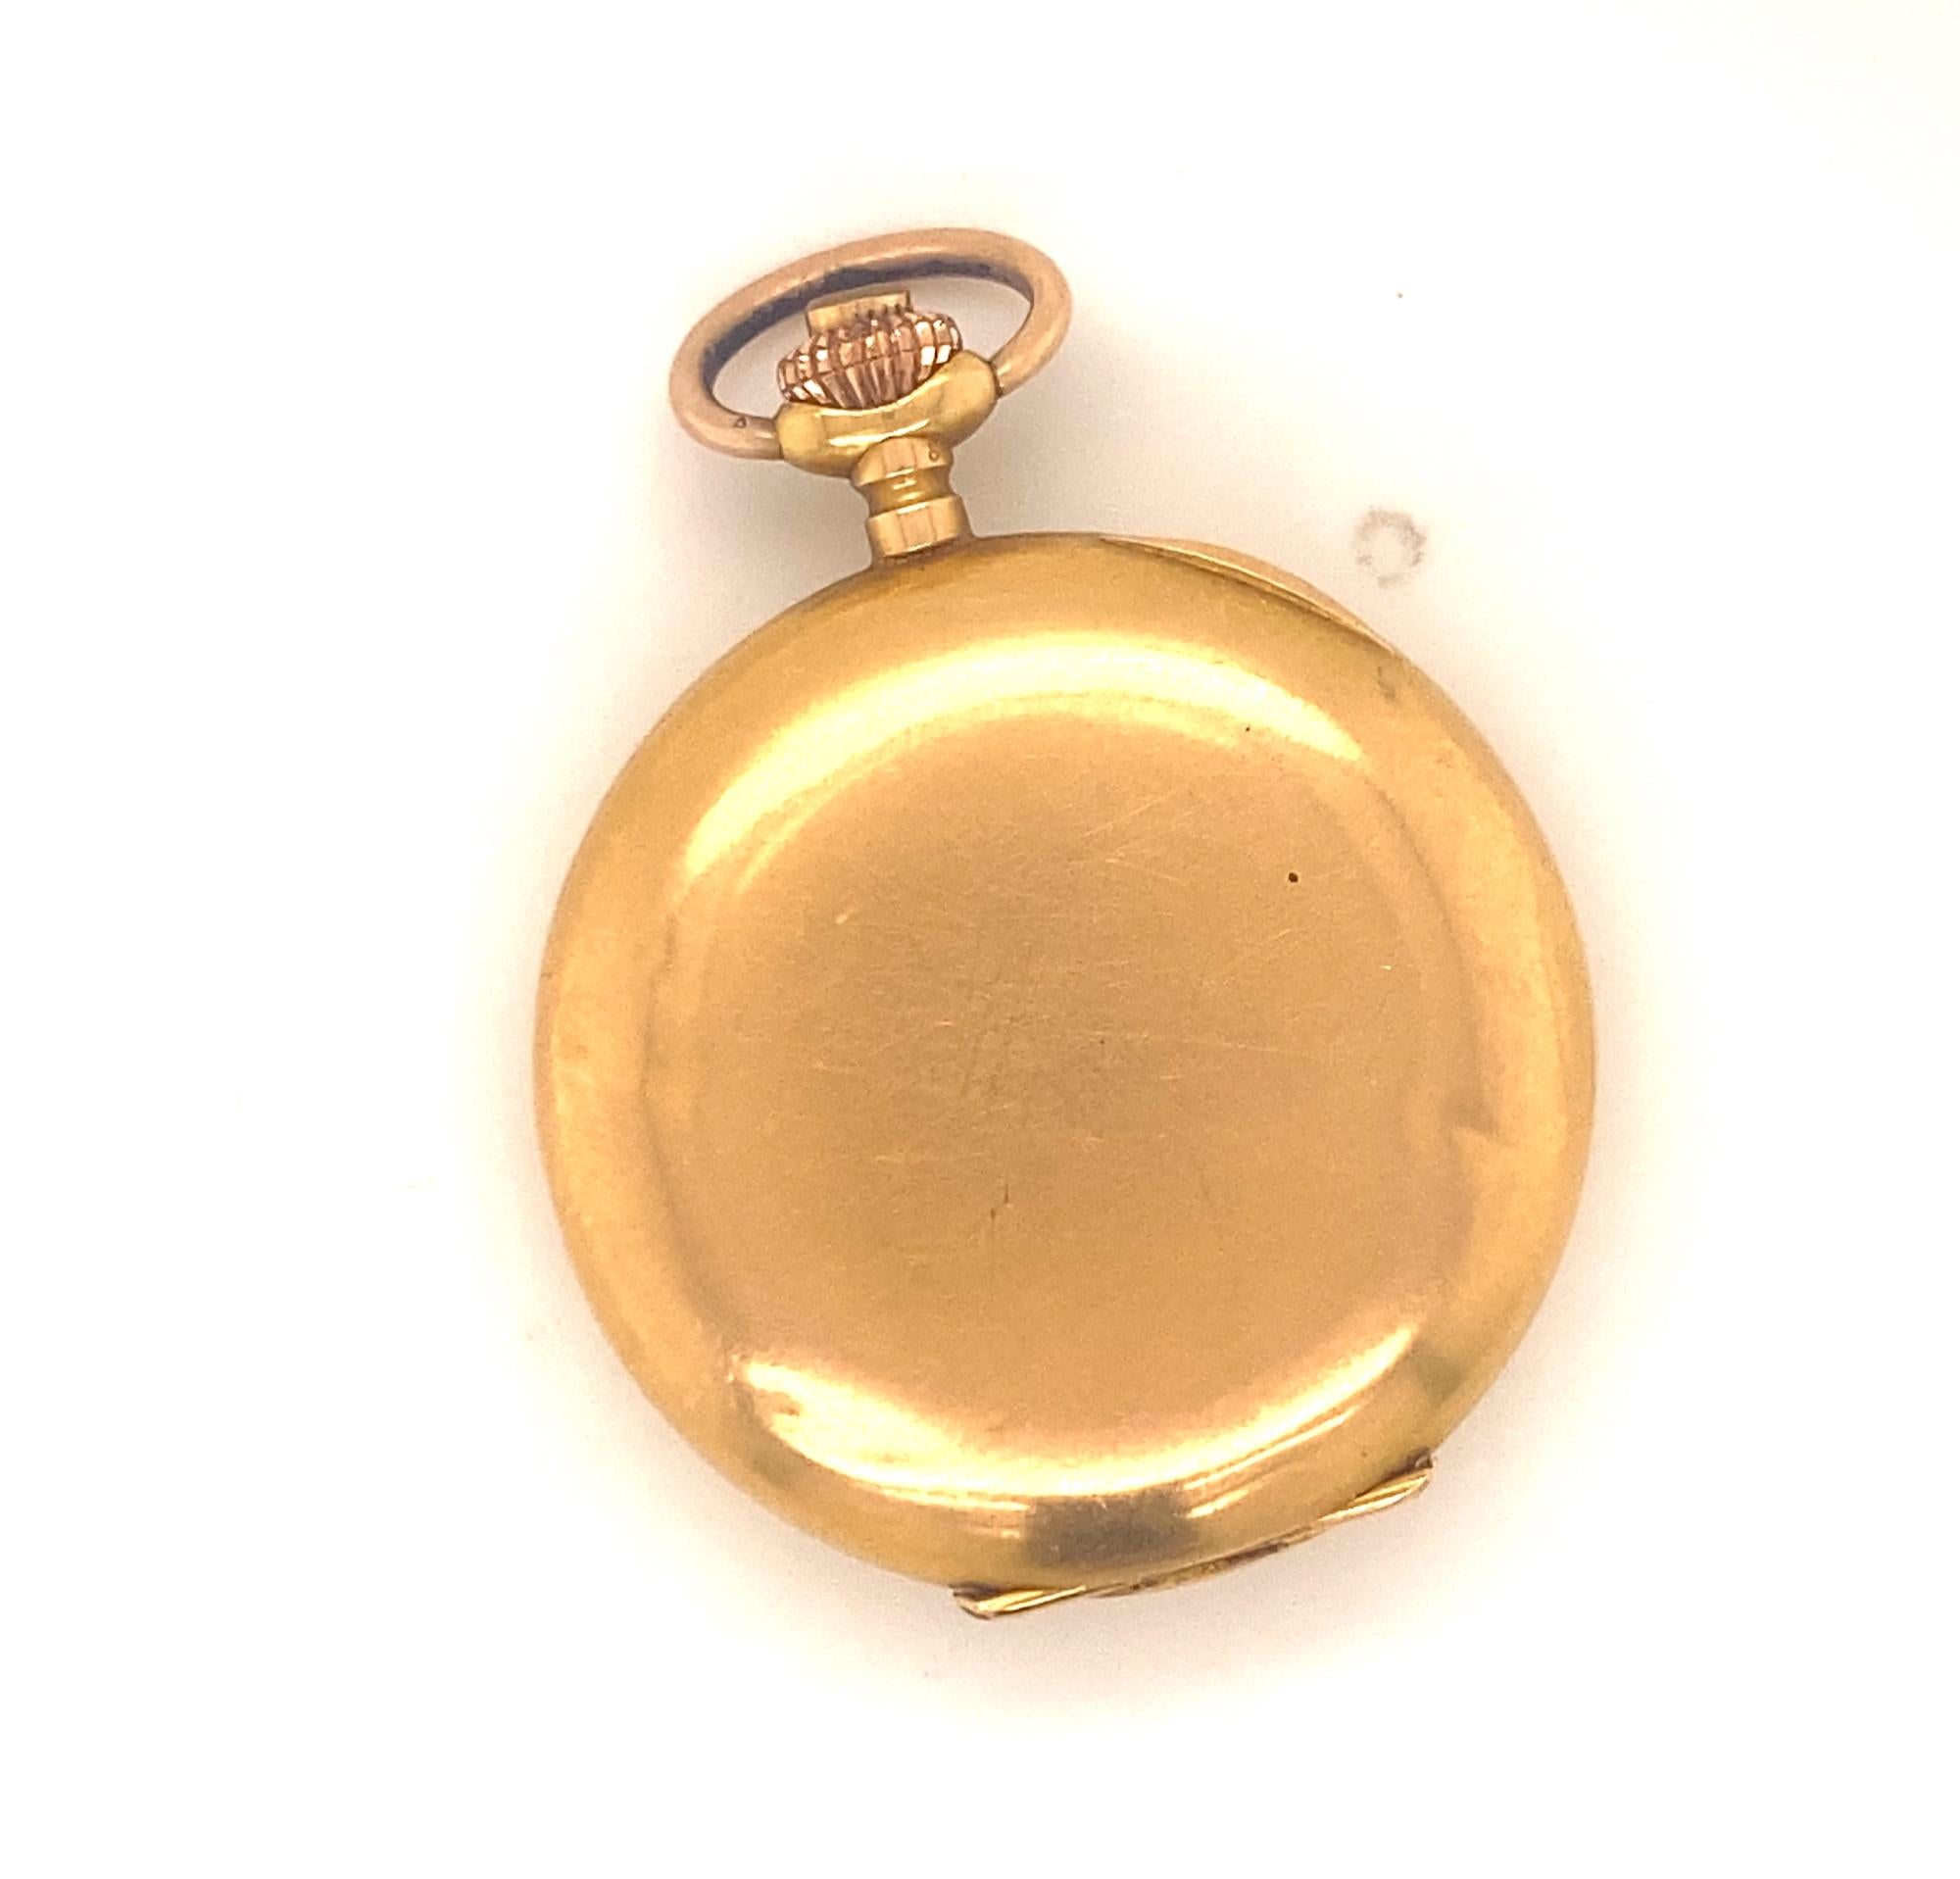 Antique Art Nouveau Ladies Girard- Perragux 18K Gold Pendant Watch In Good Condition For Sale In Woodland Hills, CA